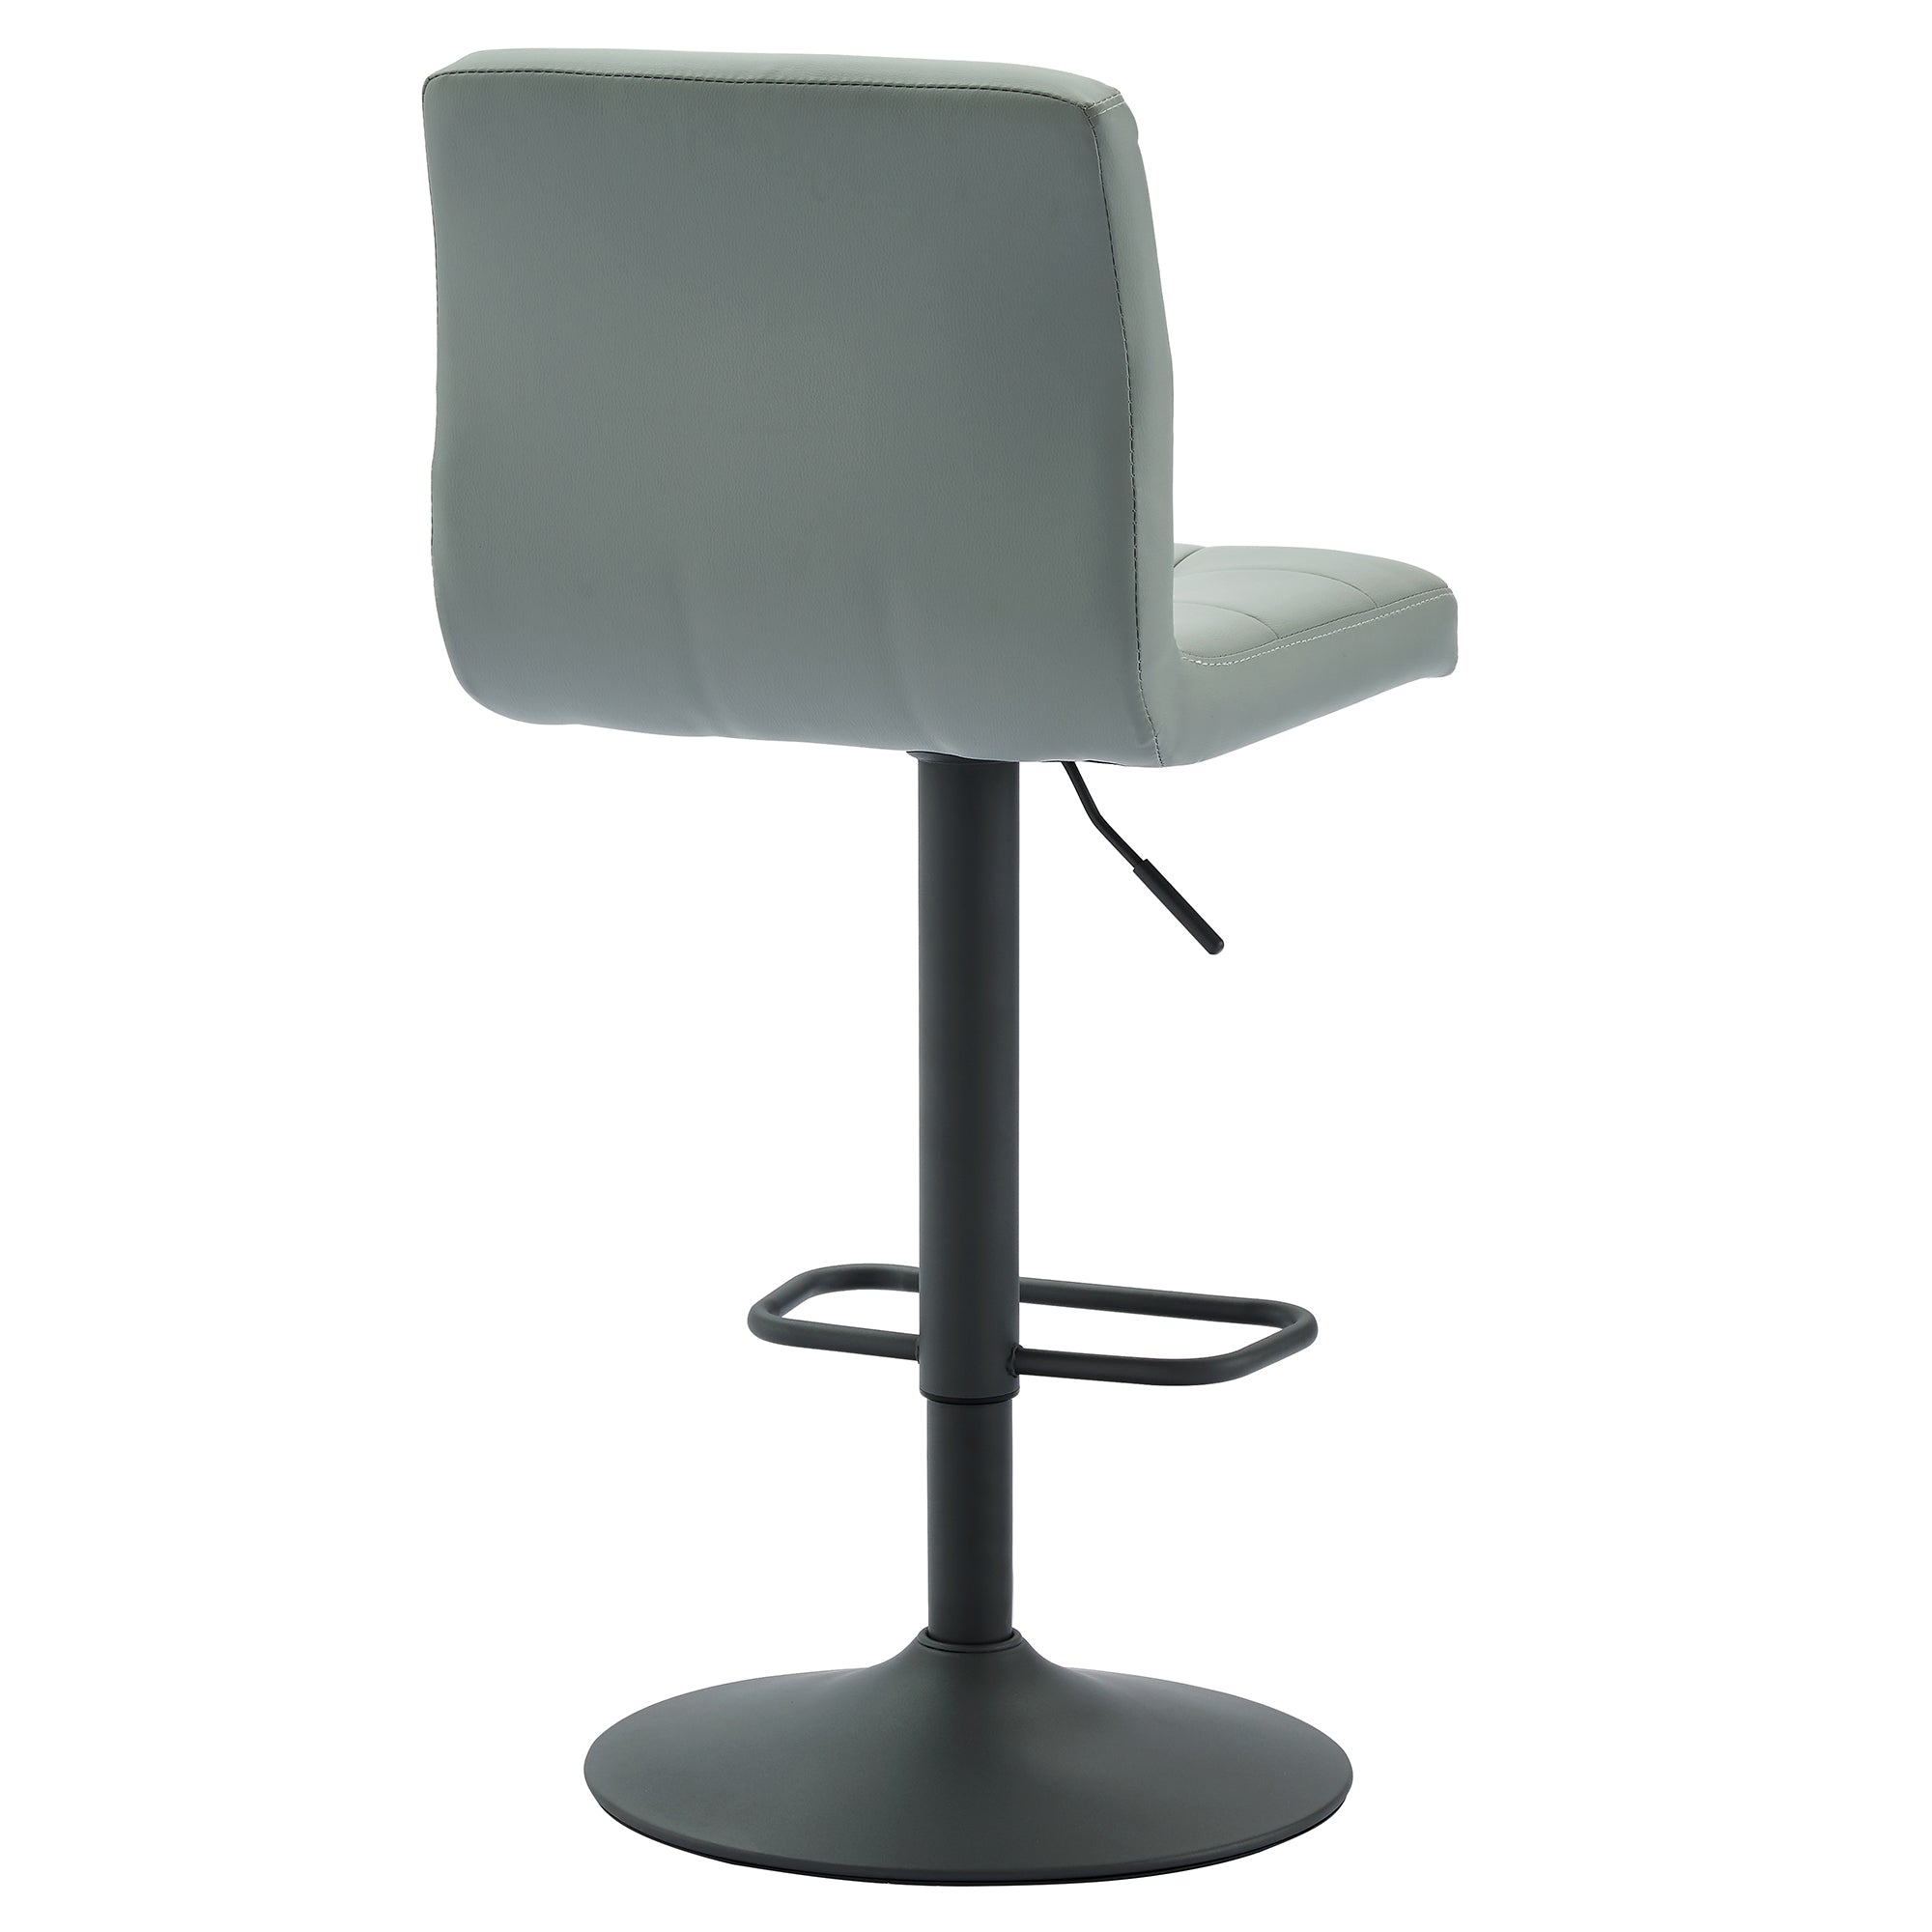 FUSION-AIR LIFT STOOL-GREY FAUX LEATHER  2 Pcs